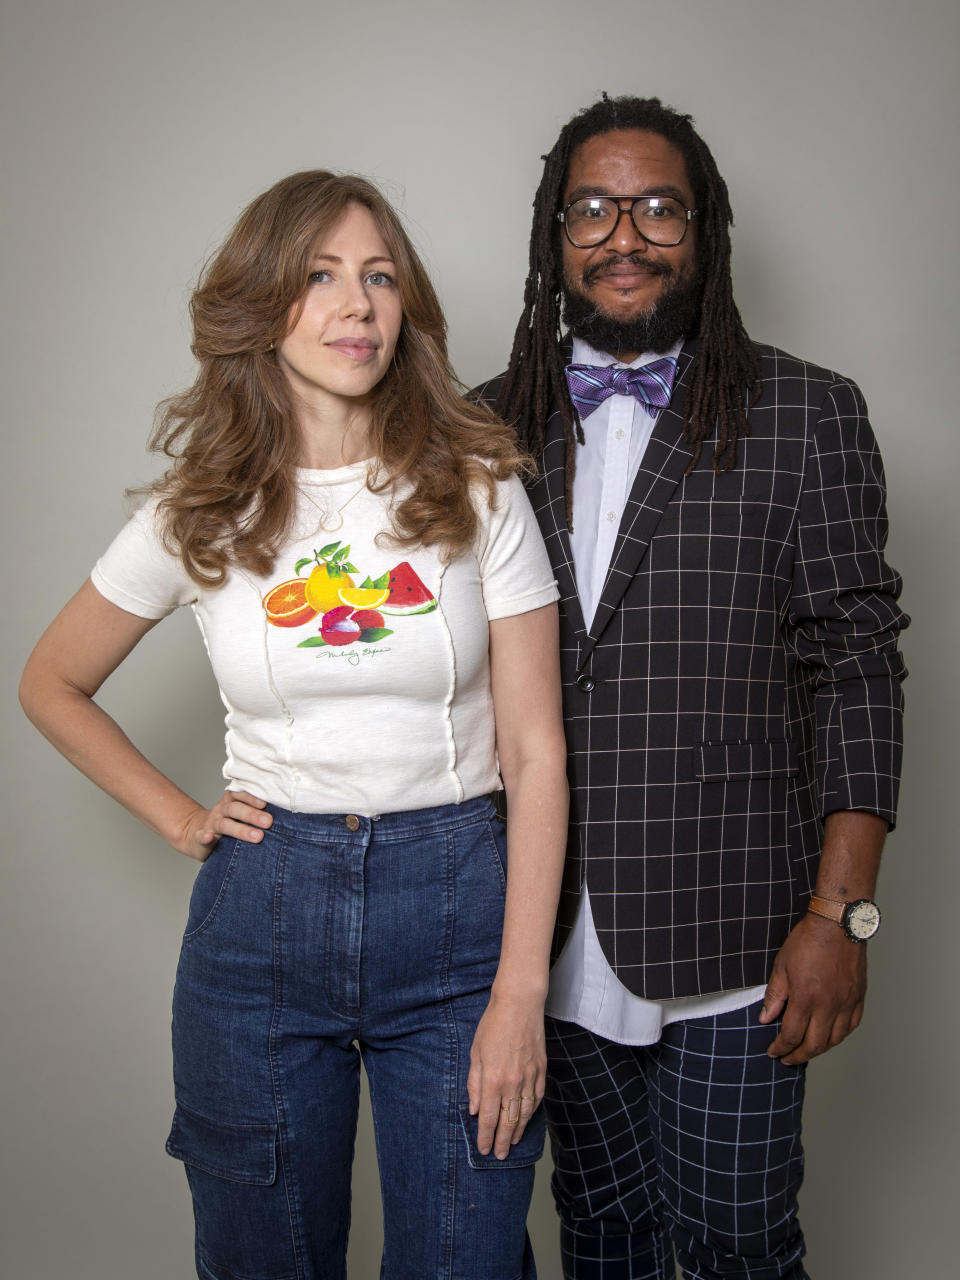 Singer Rachael Price, left, and keyboardist Akie Bermiss of Lake Street Dive pose for a portrait on Wednesday, June 19, 2024, in New York to promote their latest release "Good Together." (Photo by Andy Kropa/Invision/AP)